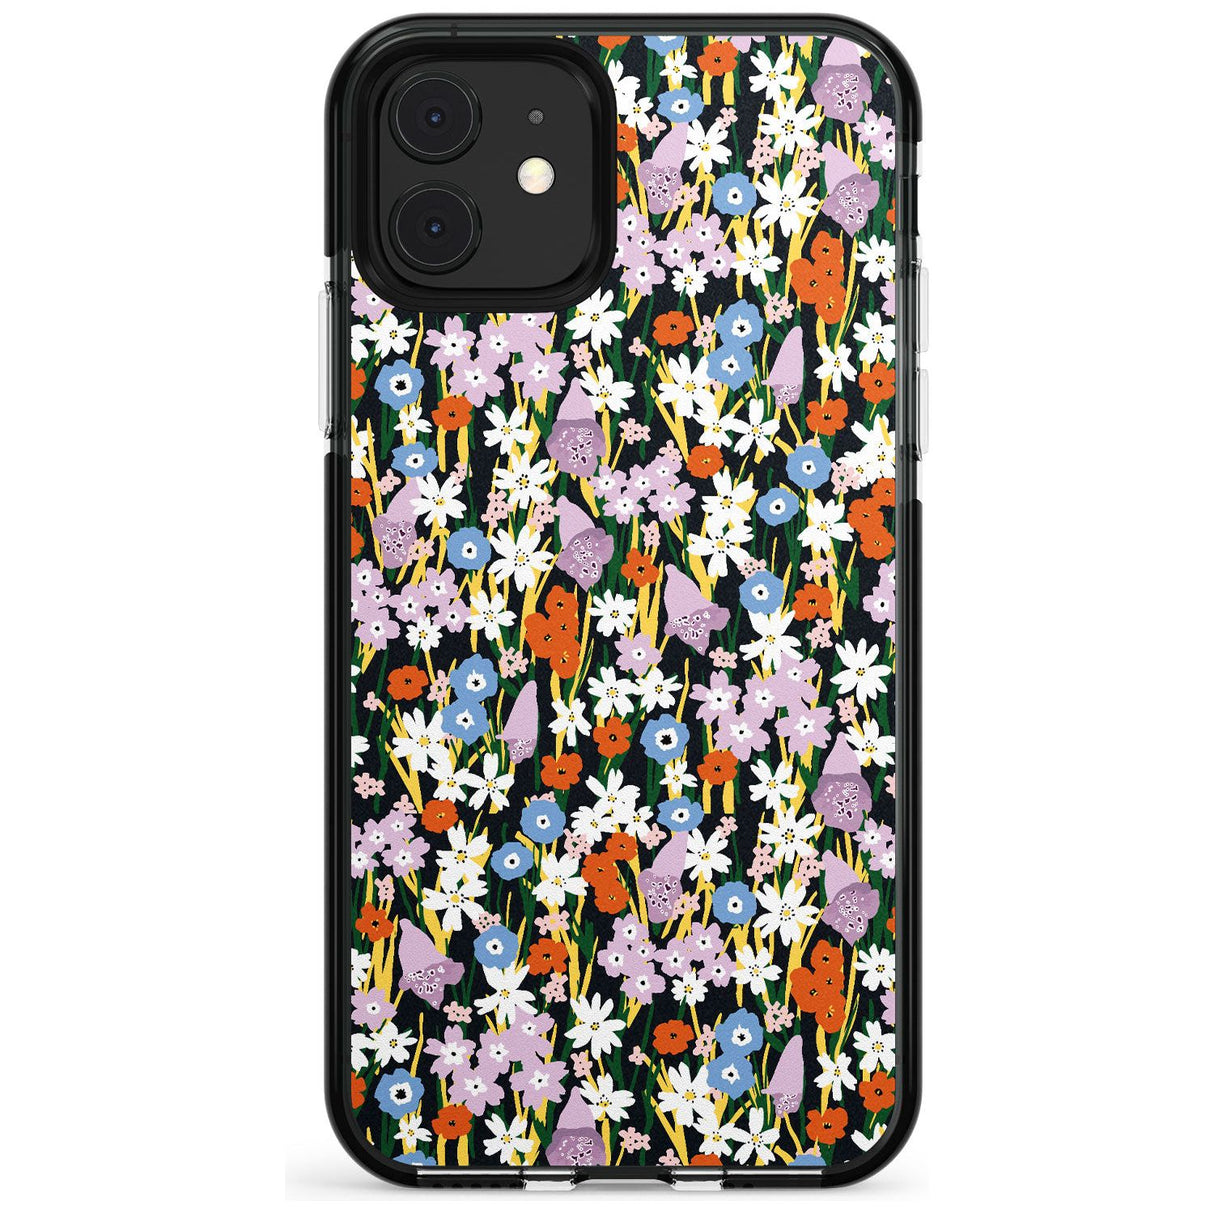 Energetic Floral Mix: Solid Pink Fade Impact Phone Case for iPhone 11 Pro Max